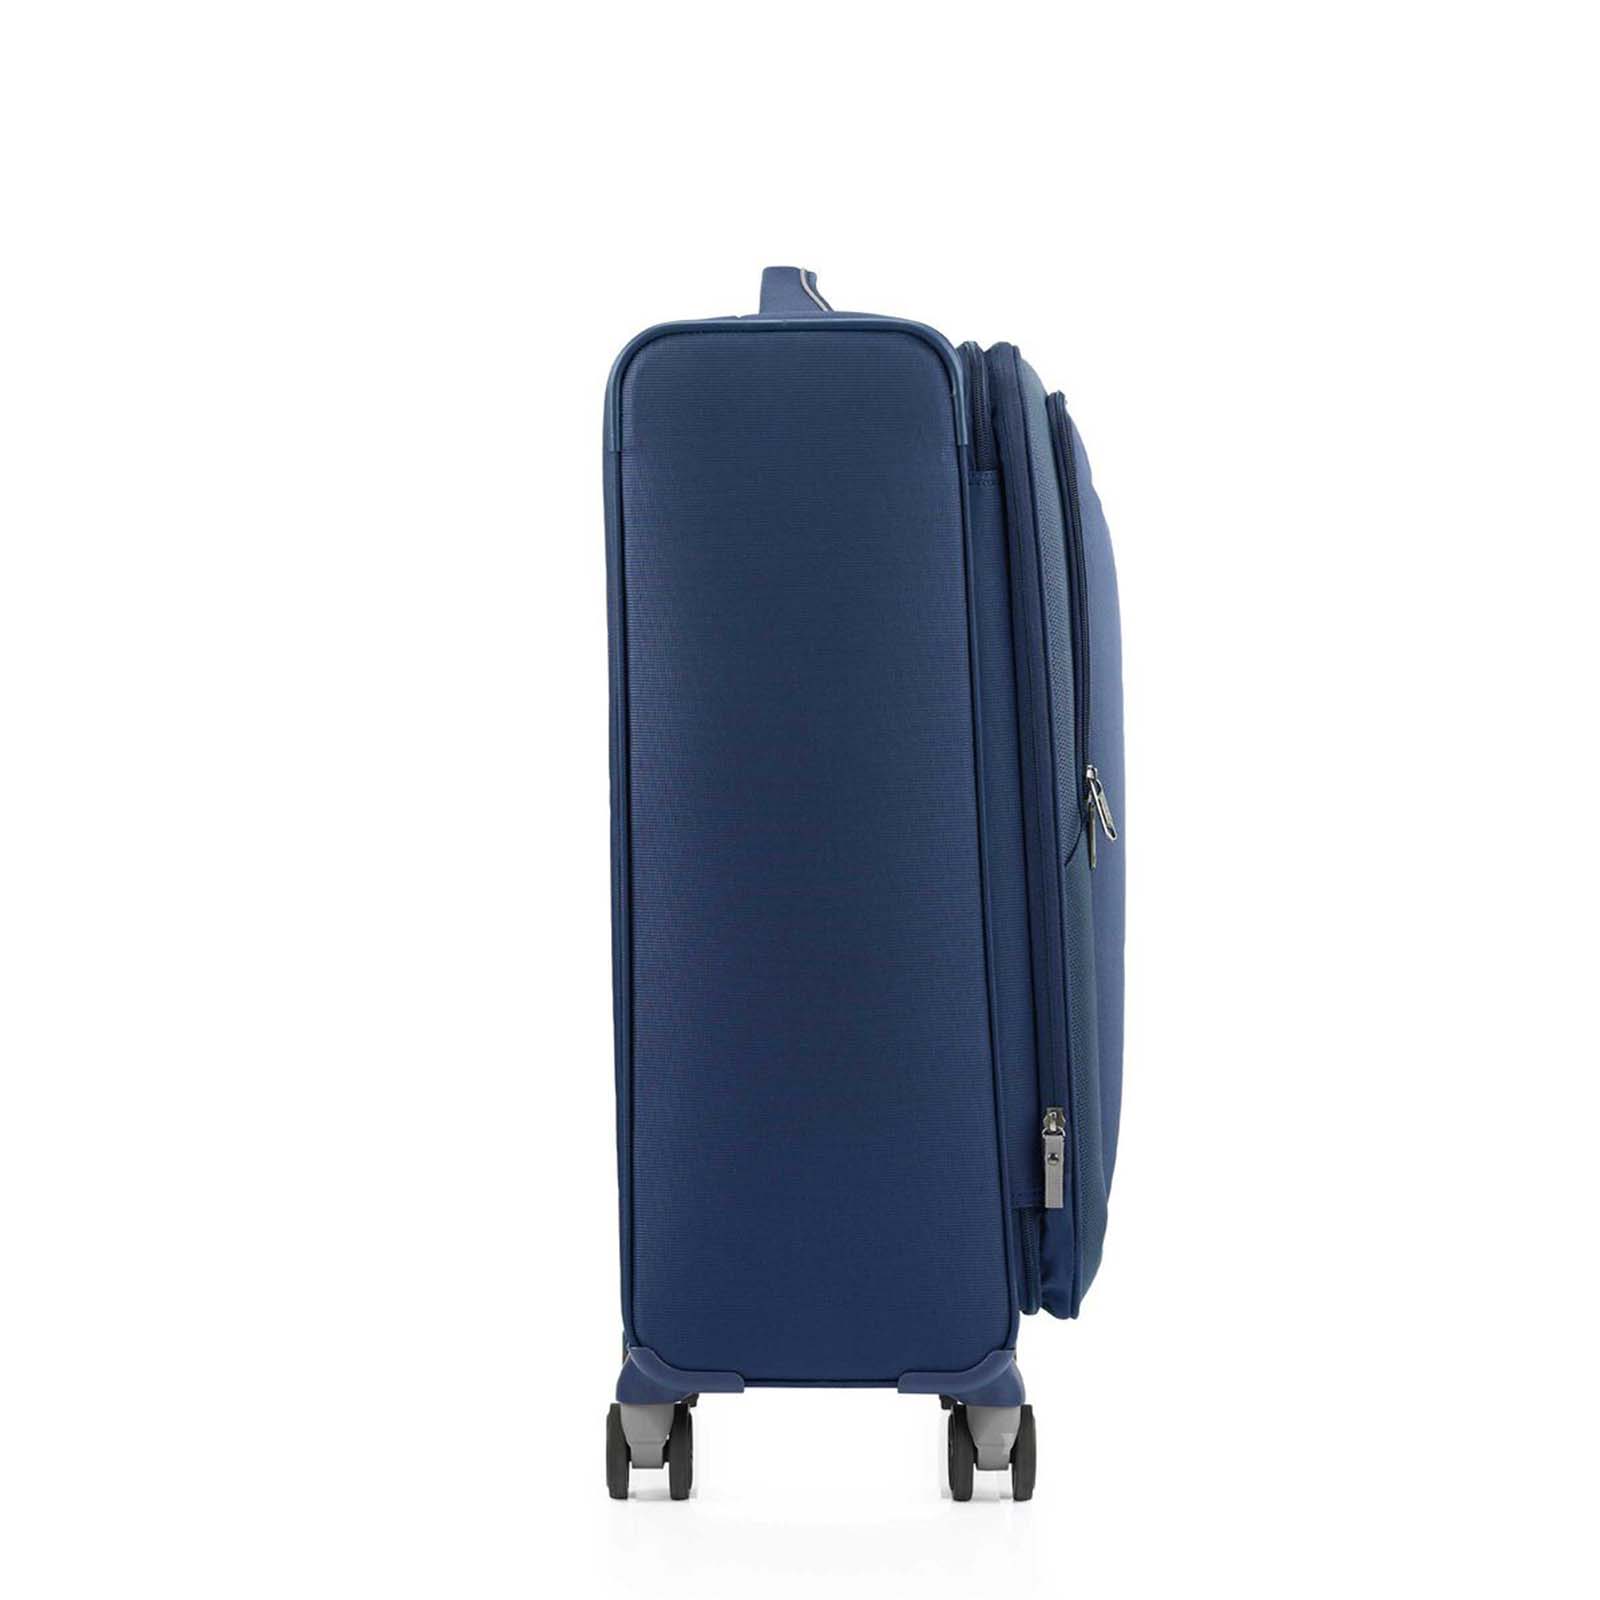 American Tourister Applite 4 Eco 71cm Suitcase Navy